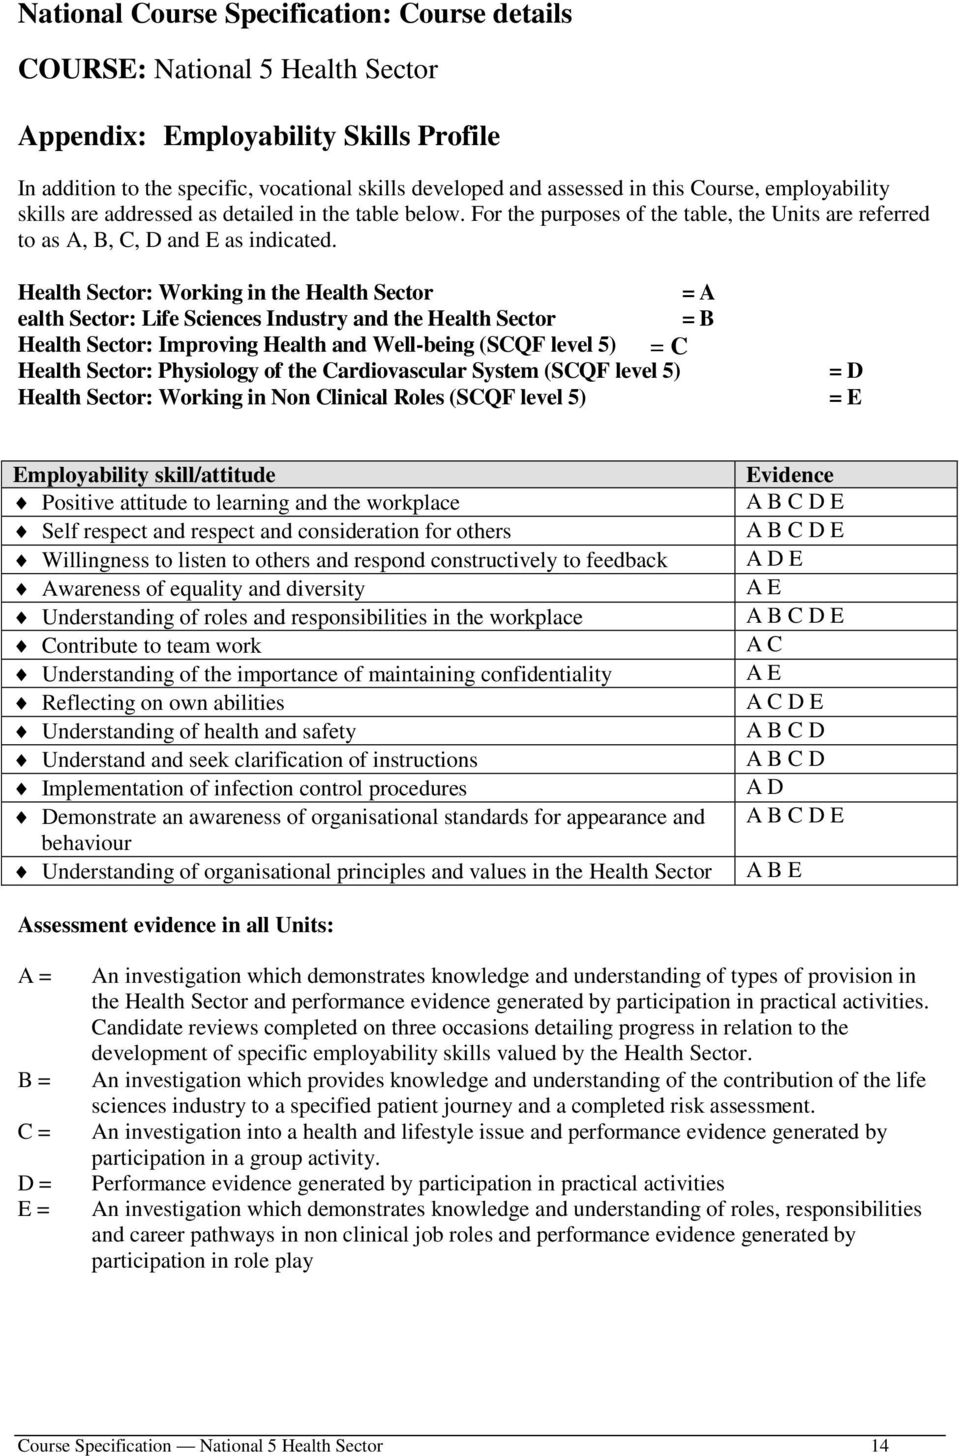 Health Sector: Working in the Health Sector = A ealth Sector: Life Sciences Industry and the Health Sector = B Health Sector: Improving Health and Well-being (SCQF level 5) = C = Health Sector: